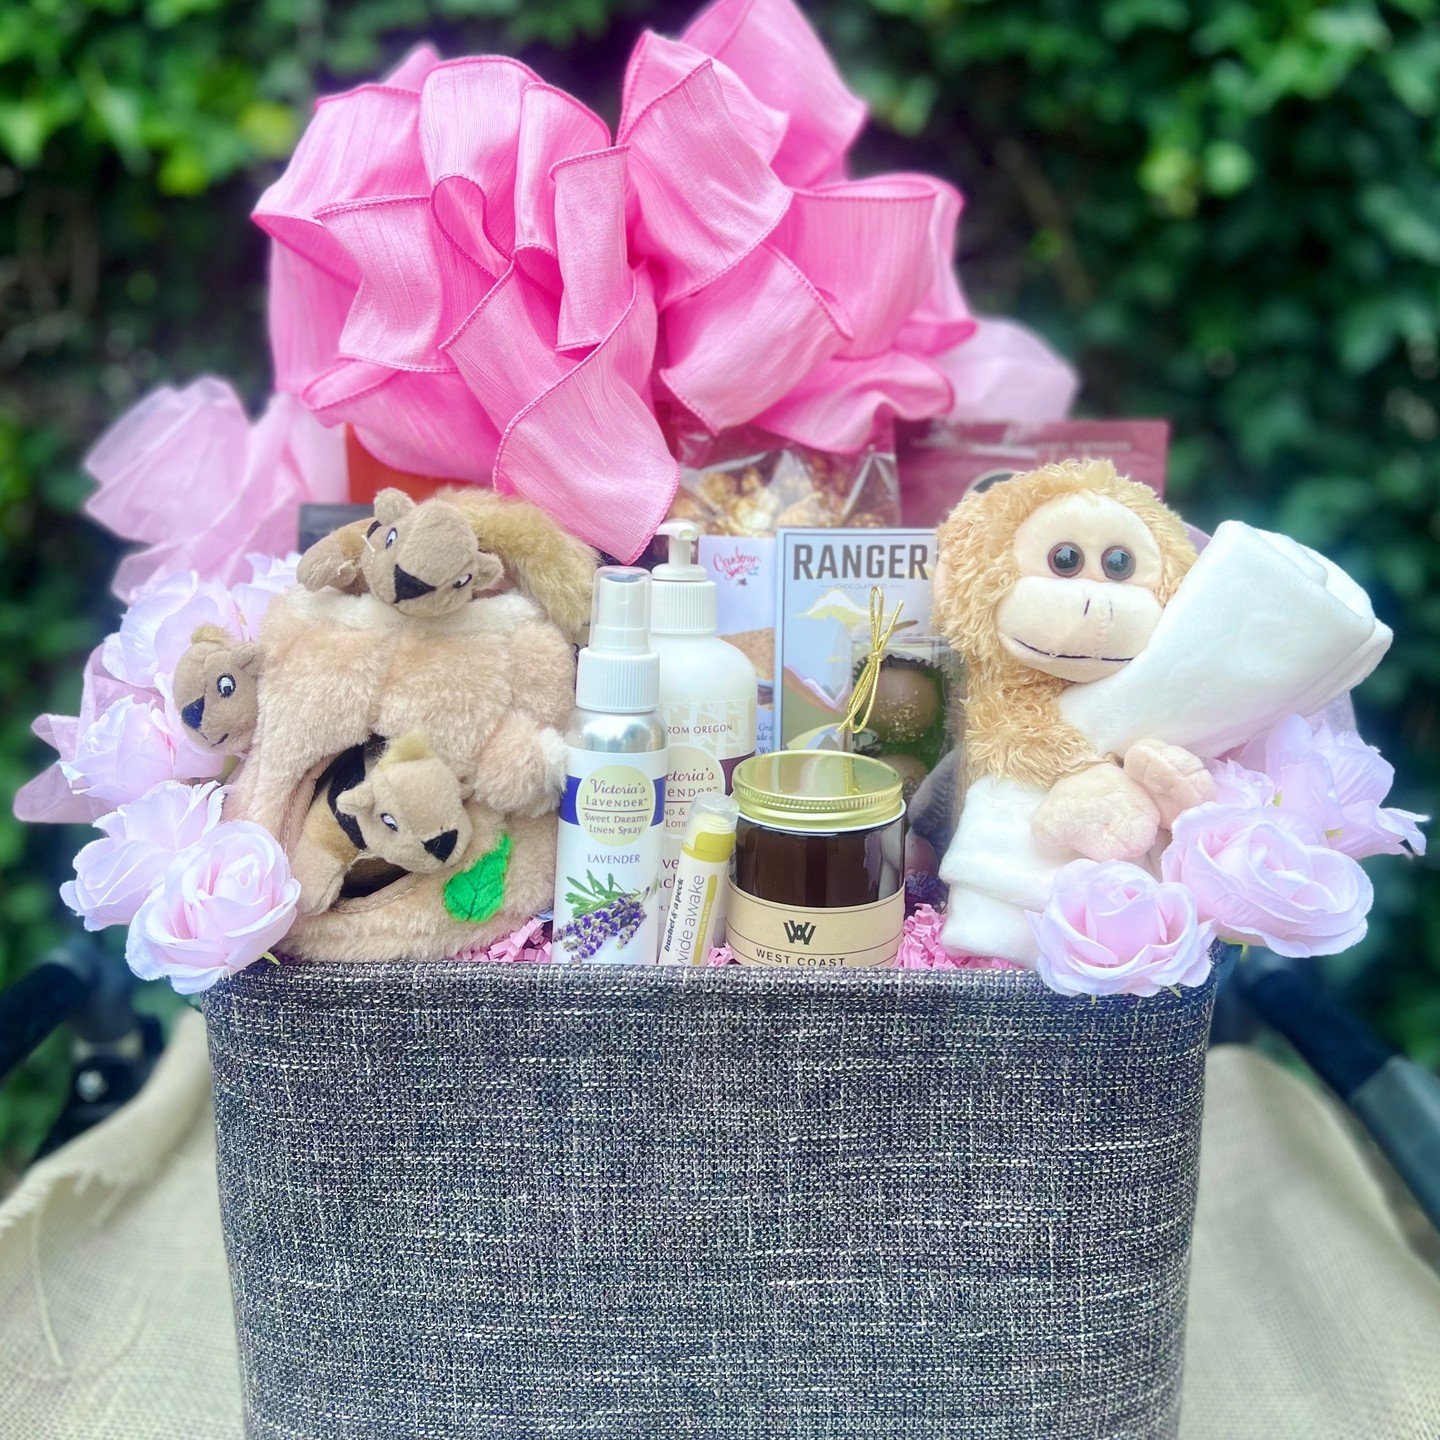 #favfriday❤️ I think this custom gift basket is my favorite of the week. Designed for someone fighting cancer.